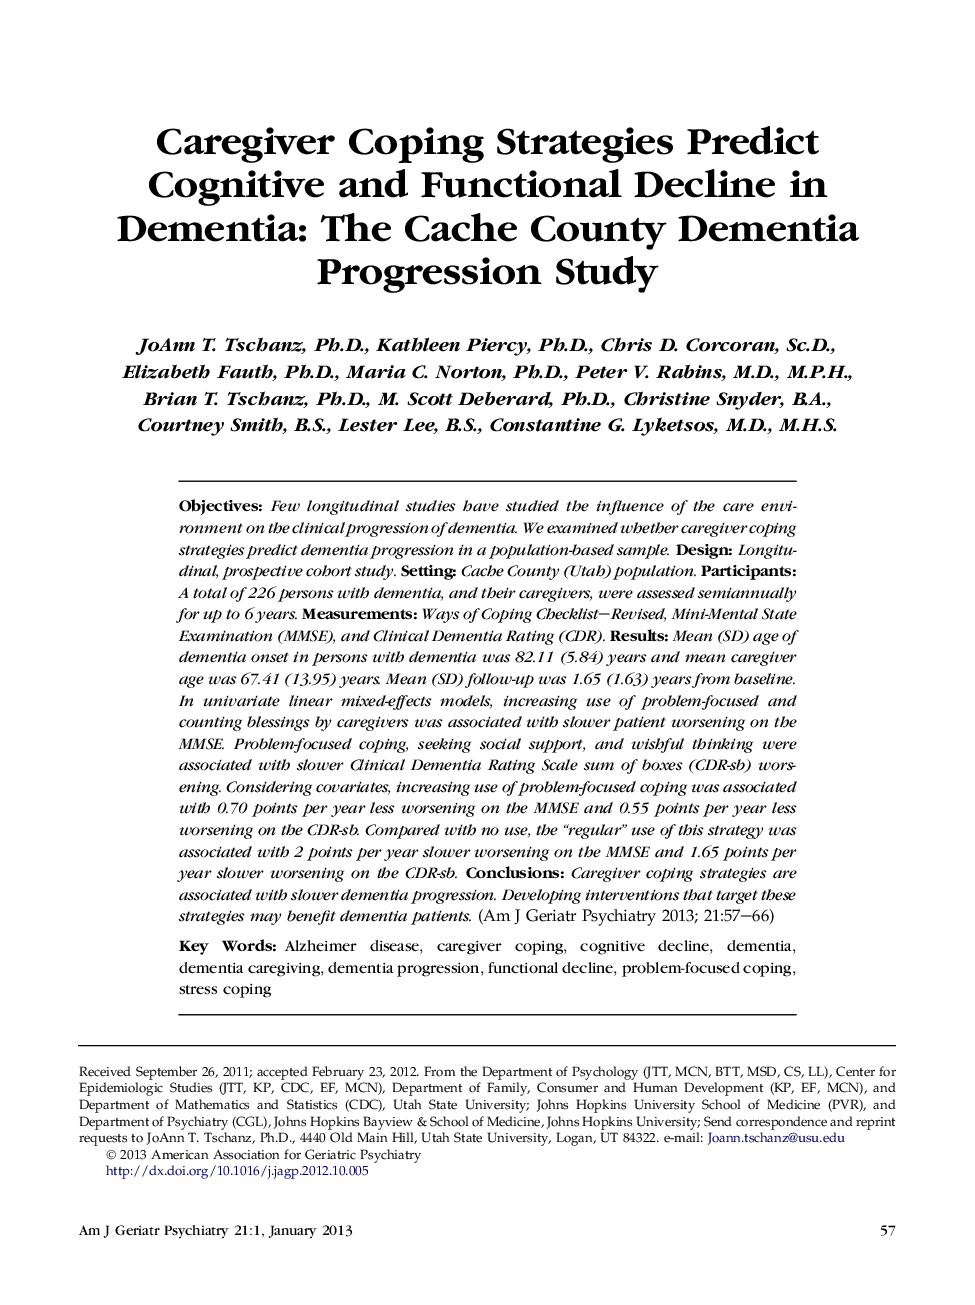 Caregiver Coping Strategies Predict Cognitive and Functional Decline in Dementia: The Cache County Dementia Progression Study